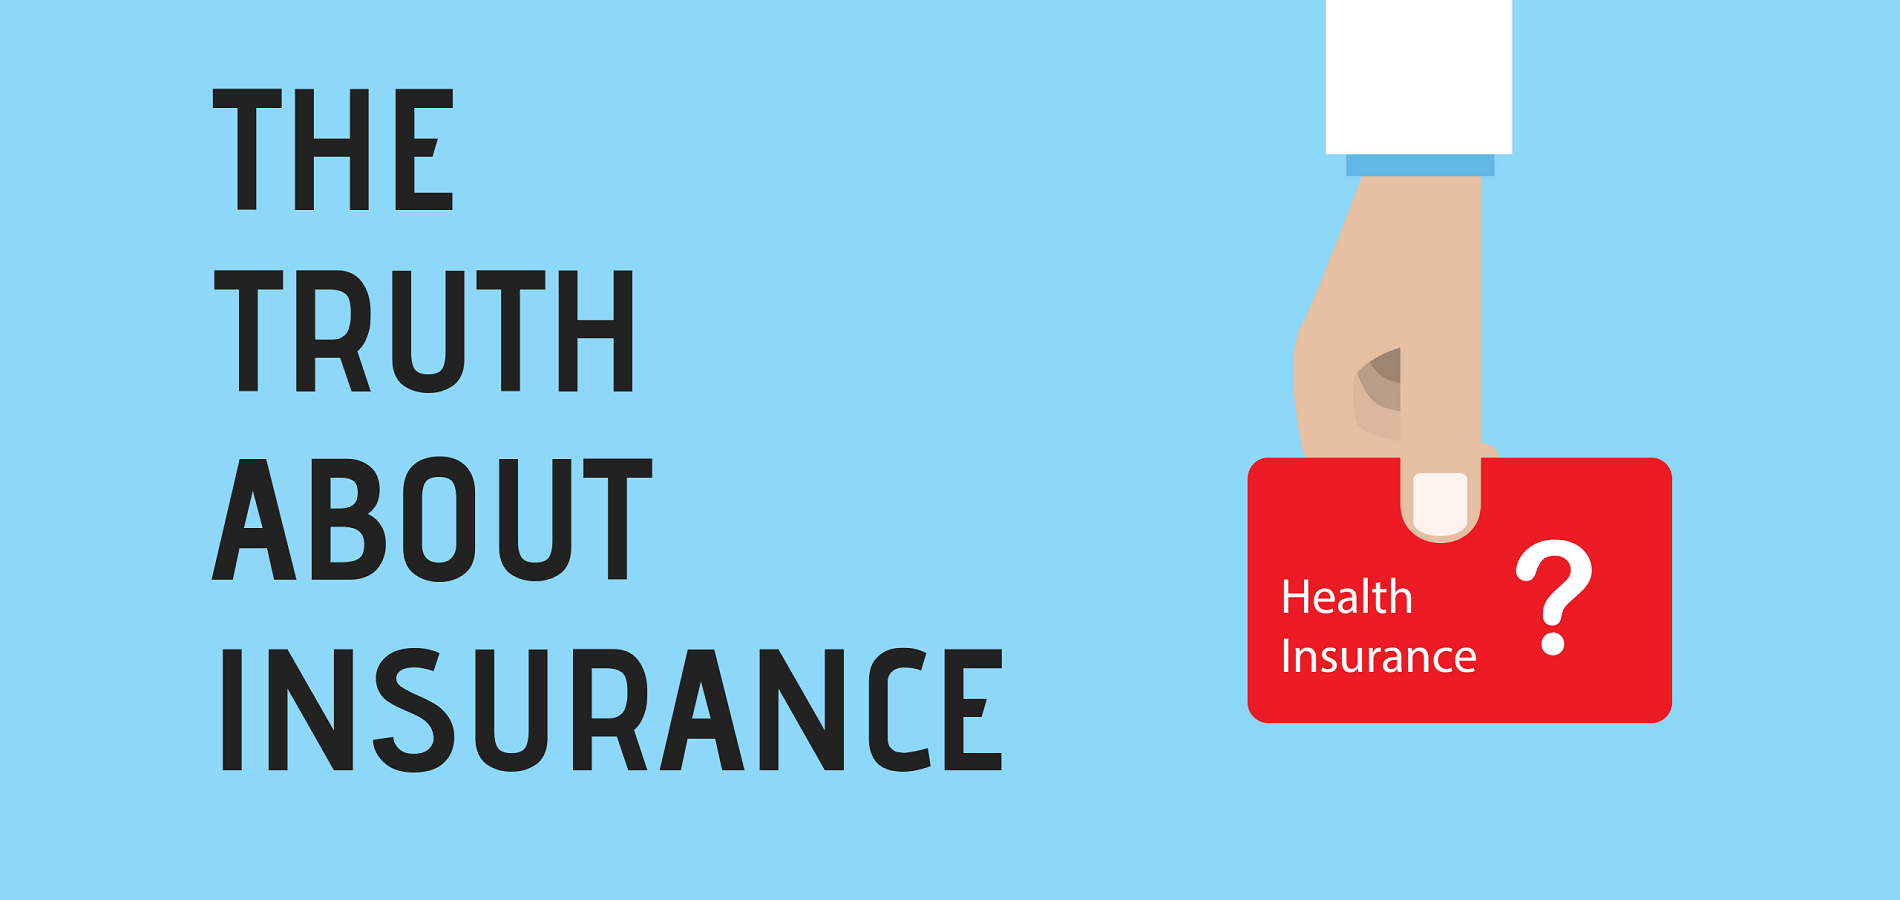 The truth about health insurance for small business in Canada by Alden-3